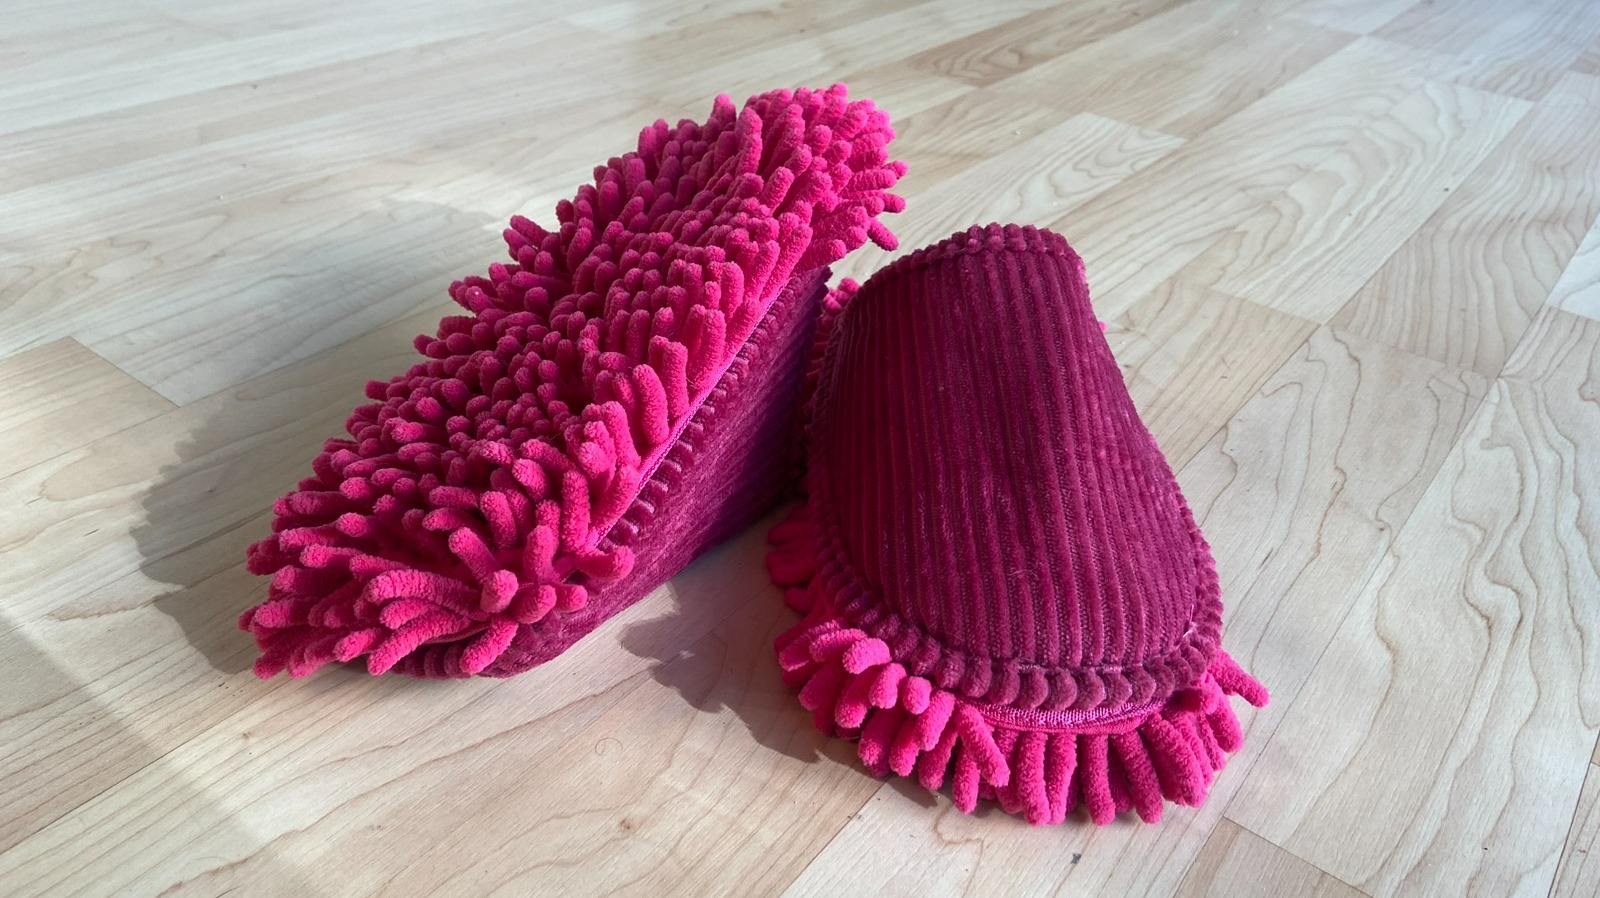 https://www.housedigest.com/img/gallery/we-tried-cleaning-with-these-mopping-slippers-and-found-squeaky-clean-results/l-intro-1685128036.jpg